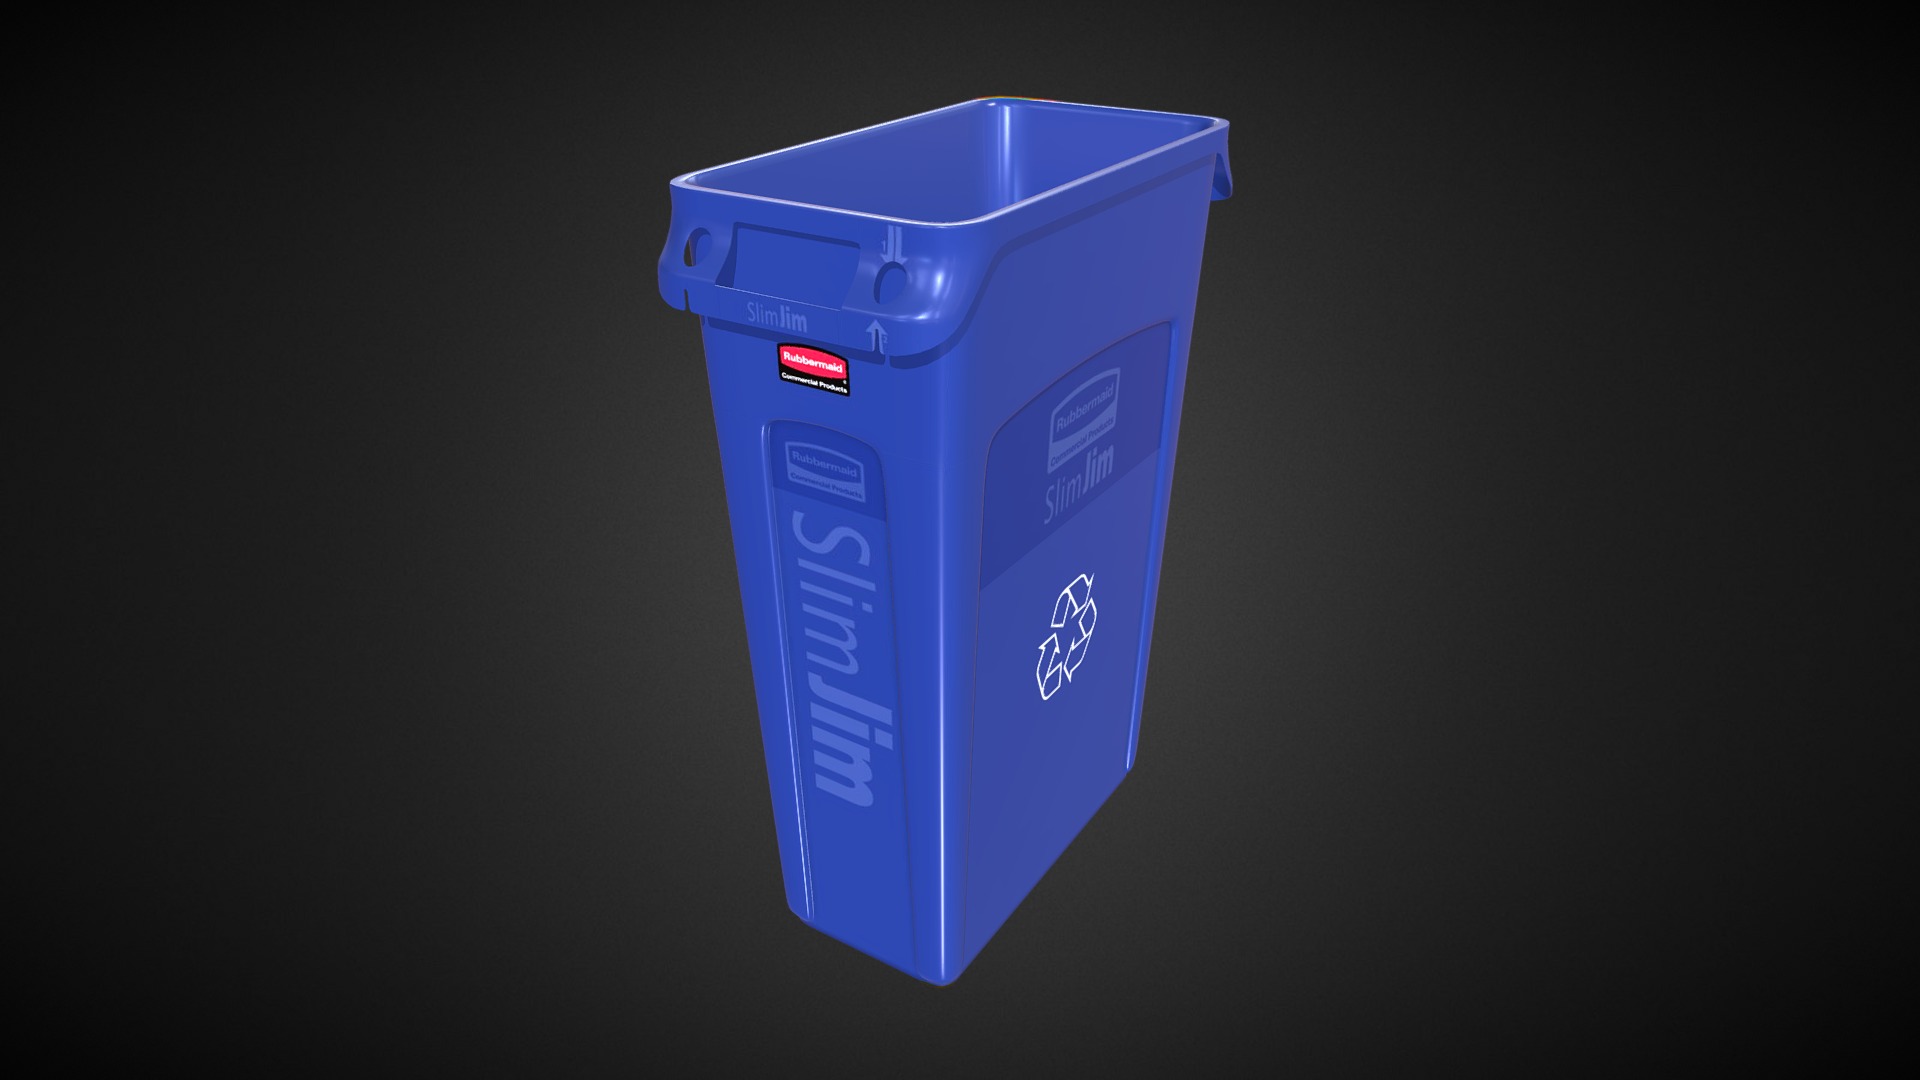 3D model Rubbermaid Recycling Container 23 Gallon Blue - This is a 3D model of the Rubbermaid Recycling Container 23 Gallon Blue. The 3D model is about a blue and white box.